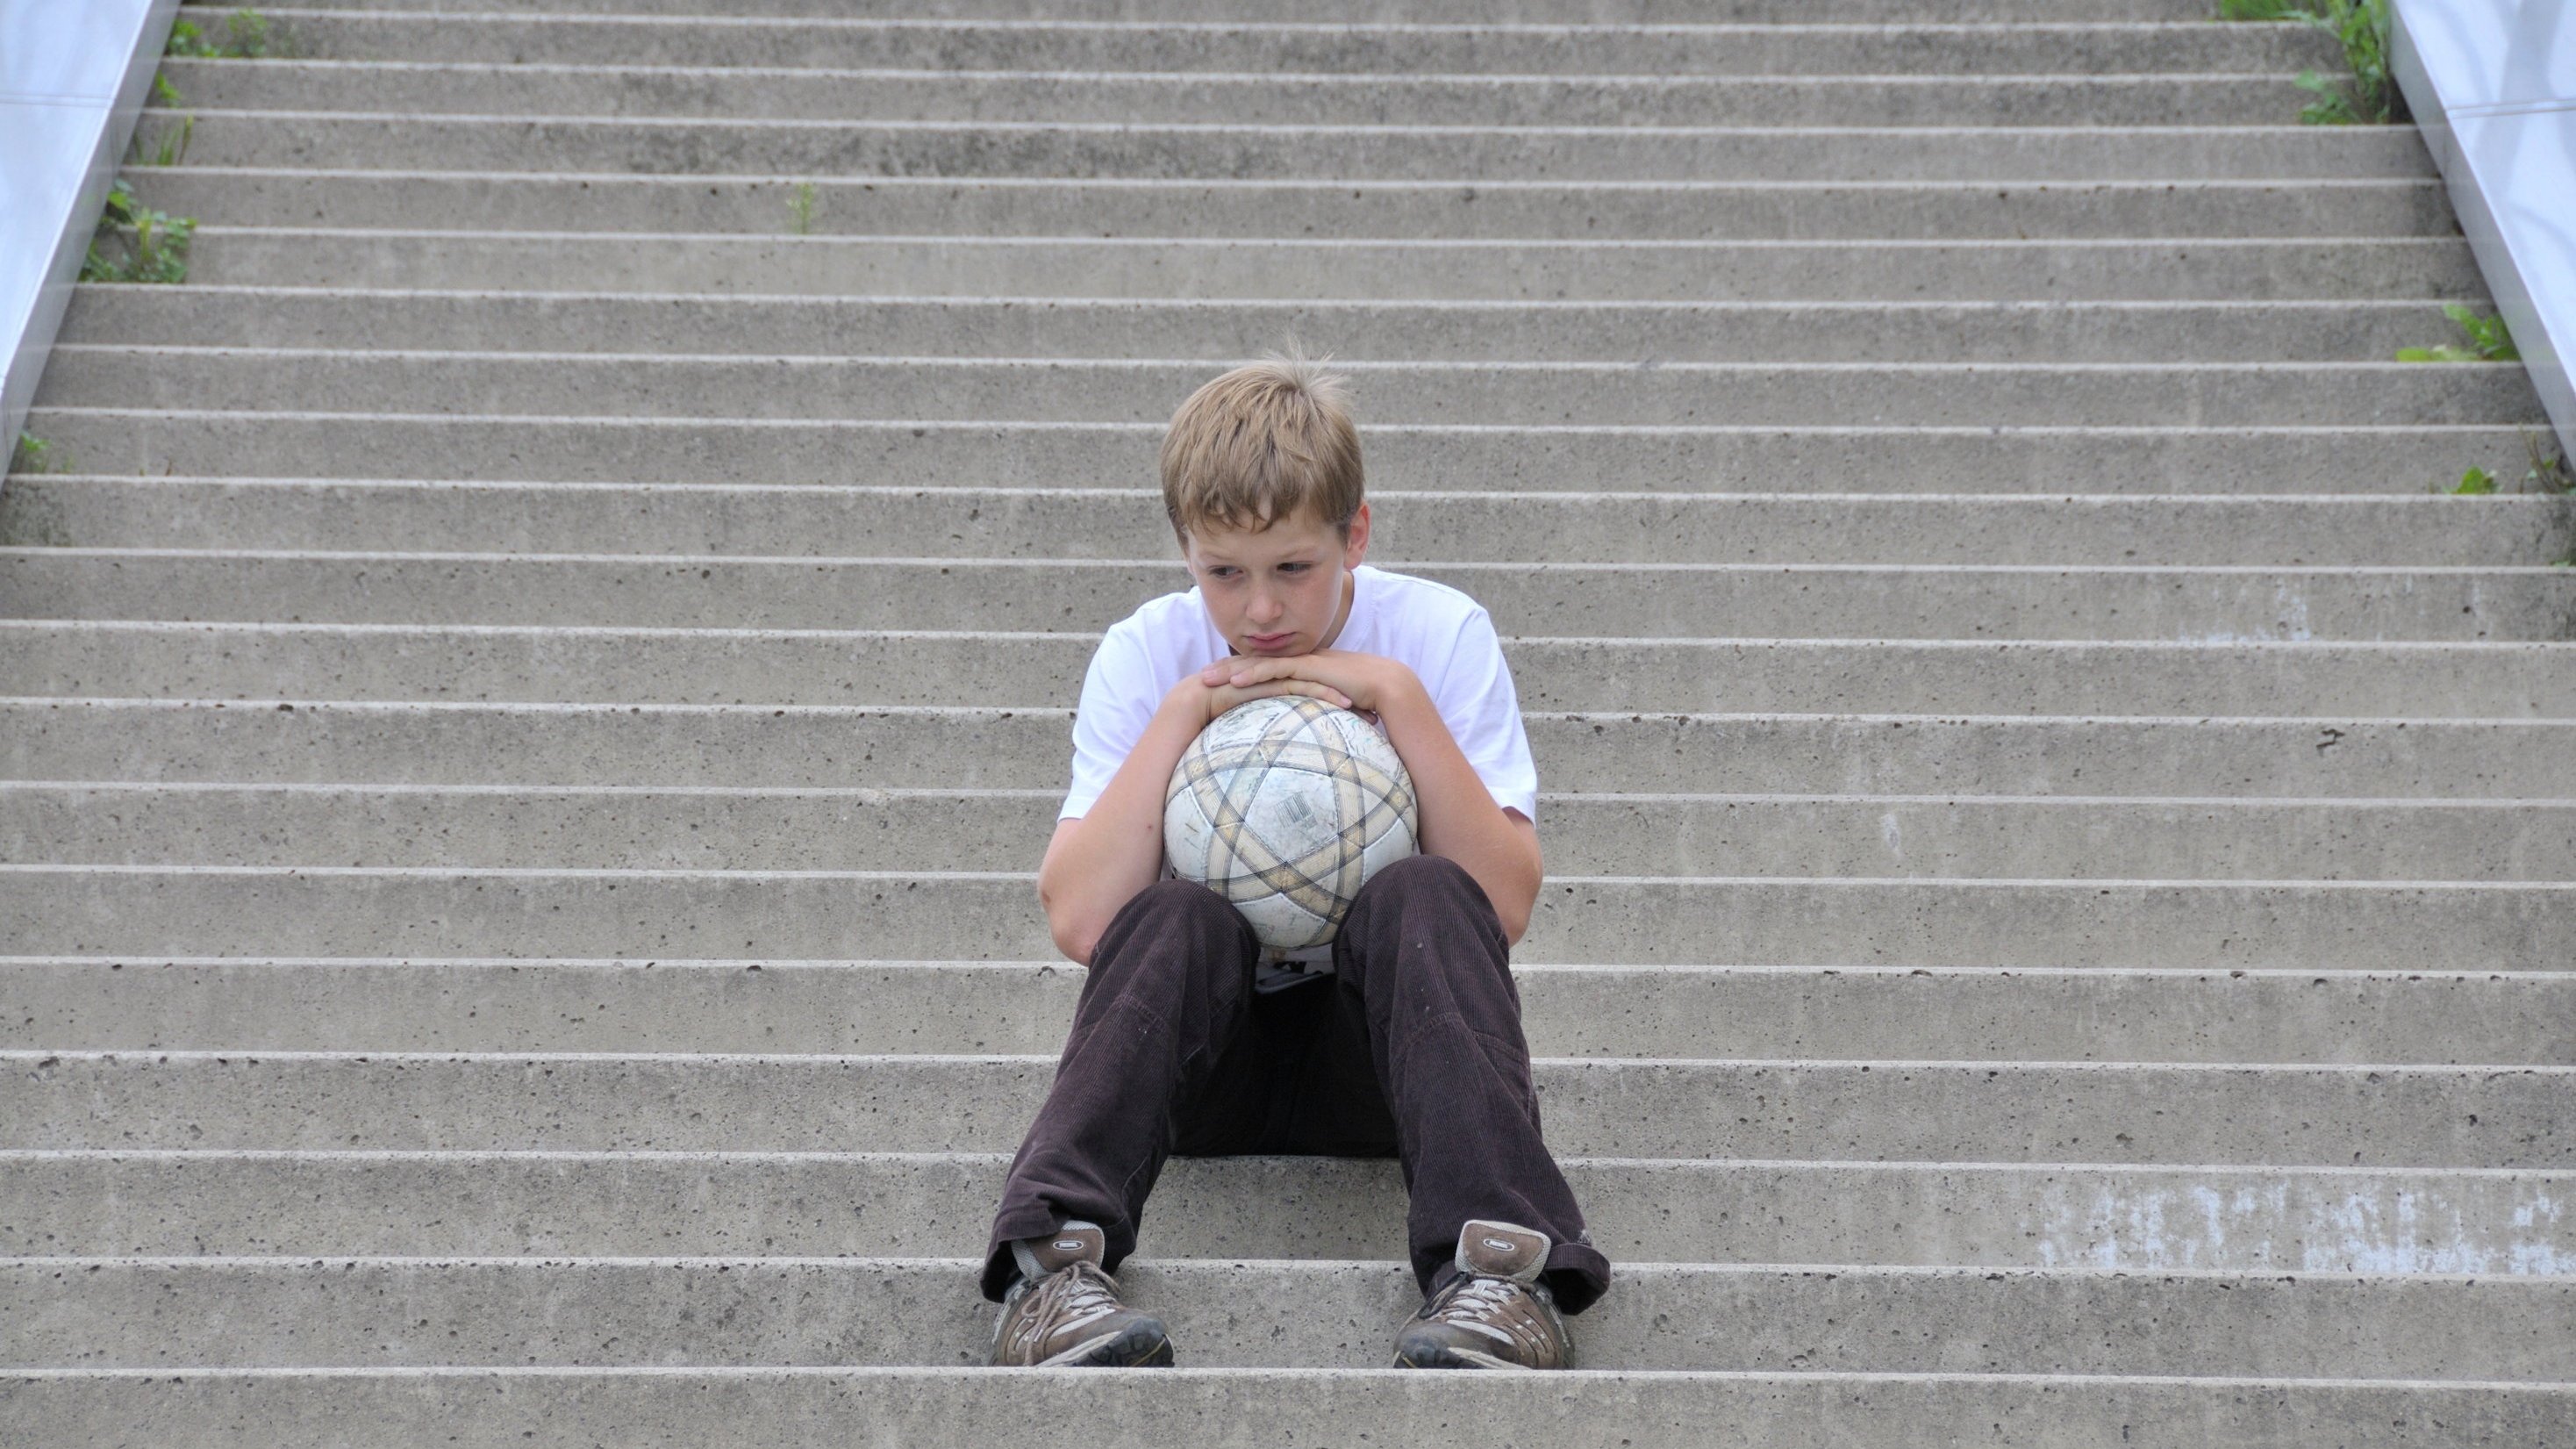 Lonesome boy with football sitting on the stairs - 28.08.2010